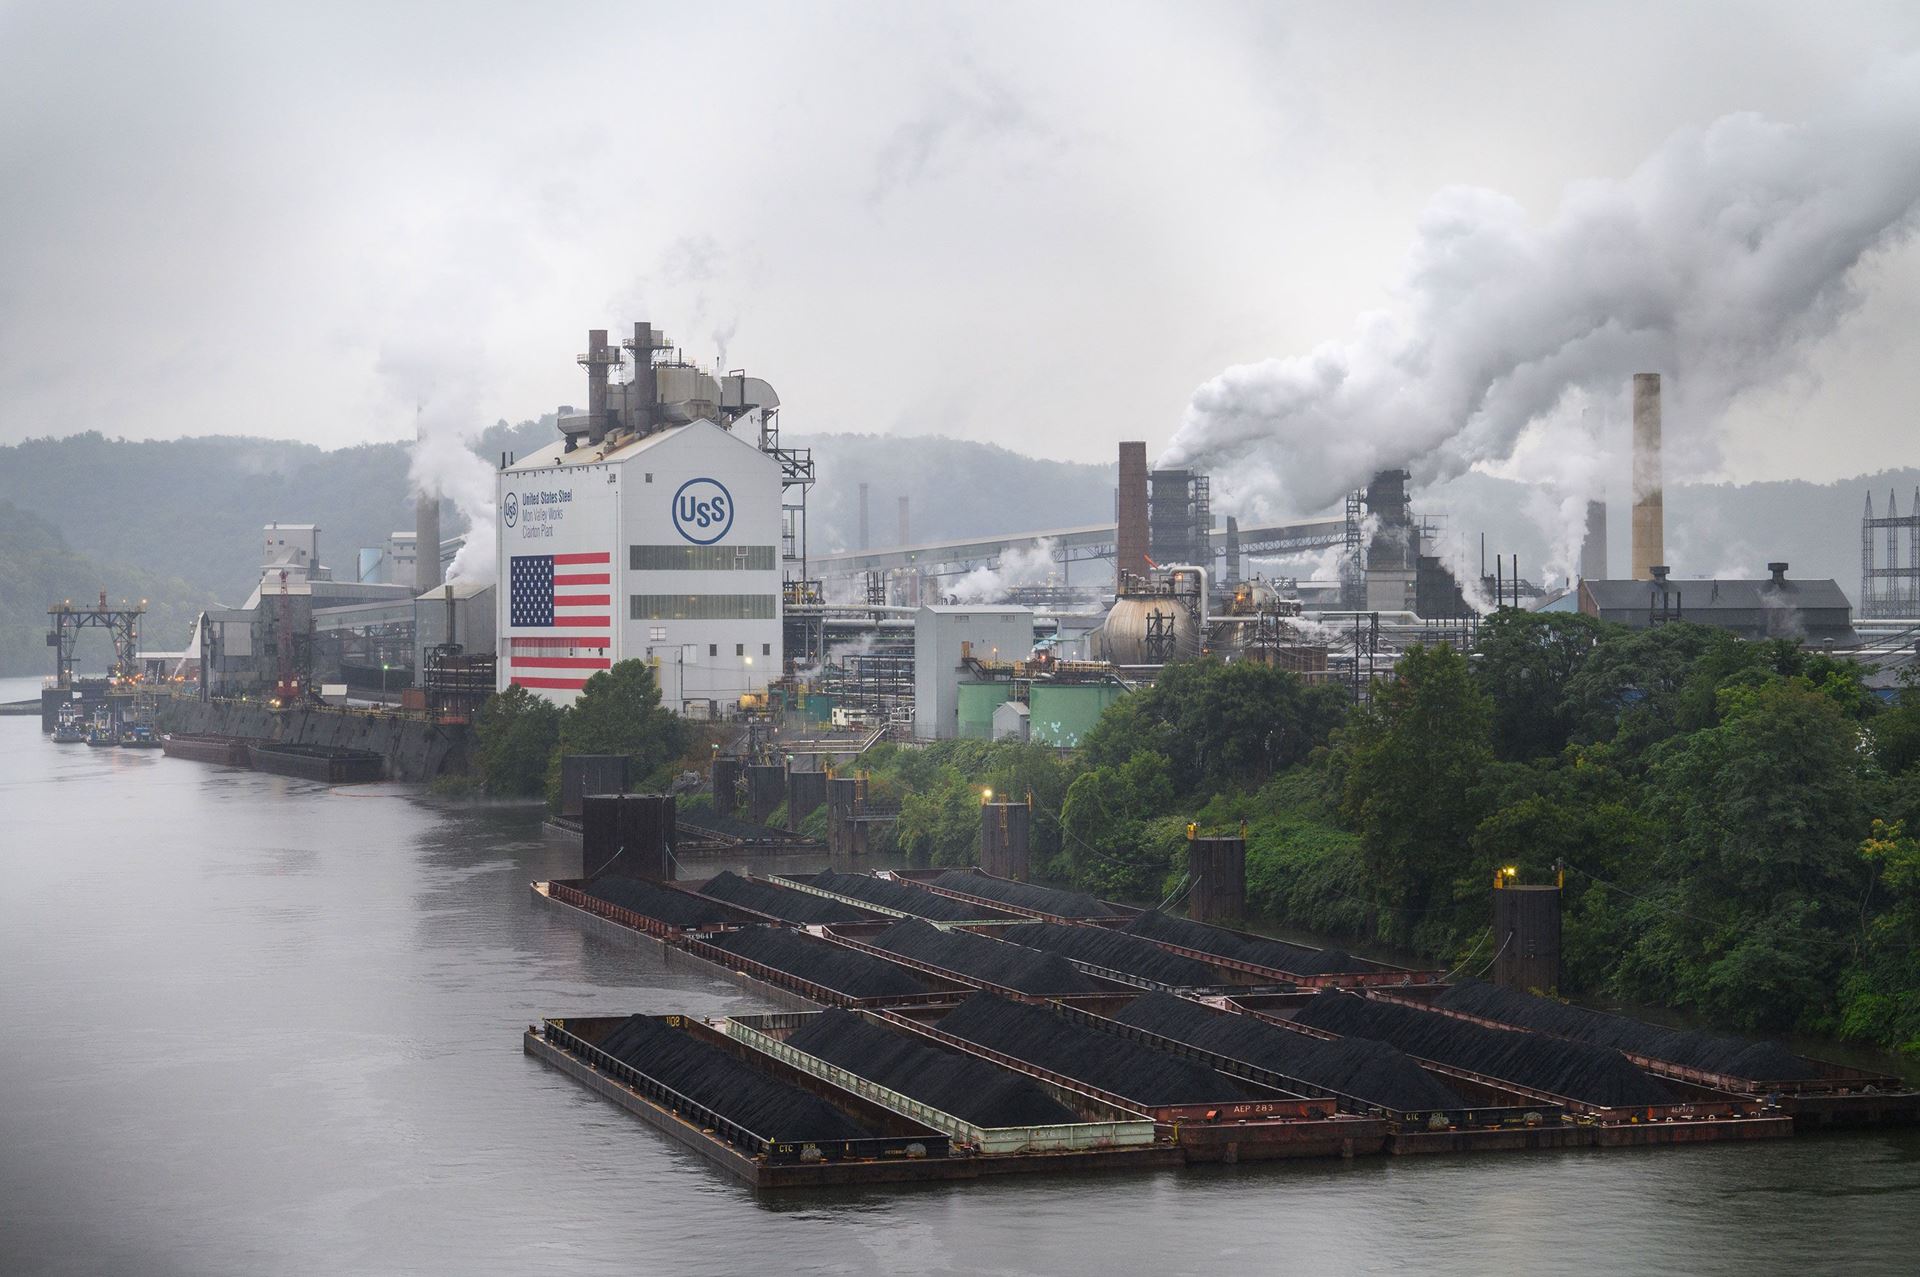 Nippon Steel outbids Cleveland-Cliffs with $14.1B all-cash offer for U.S. Steel